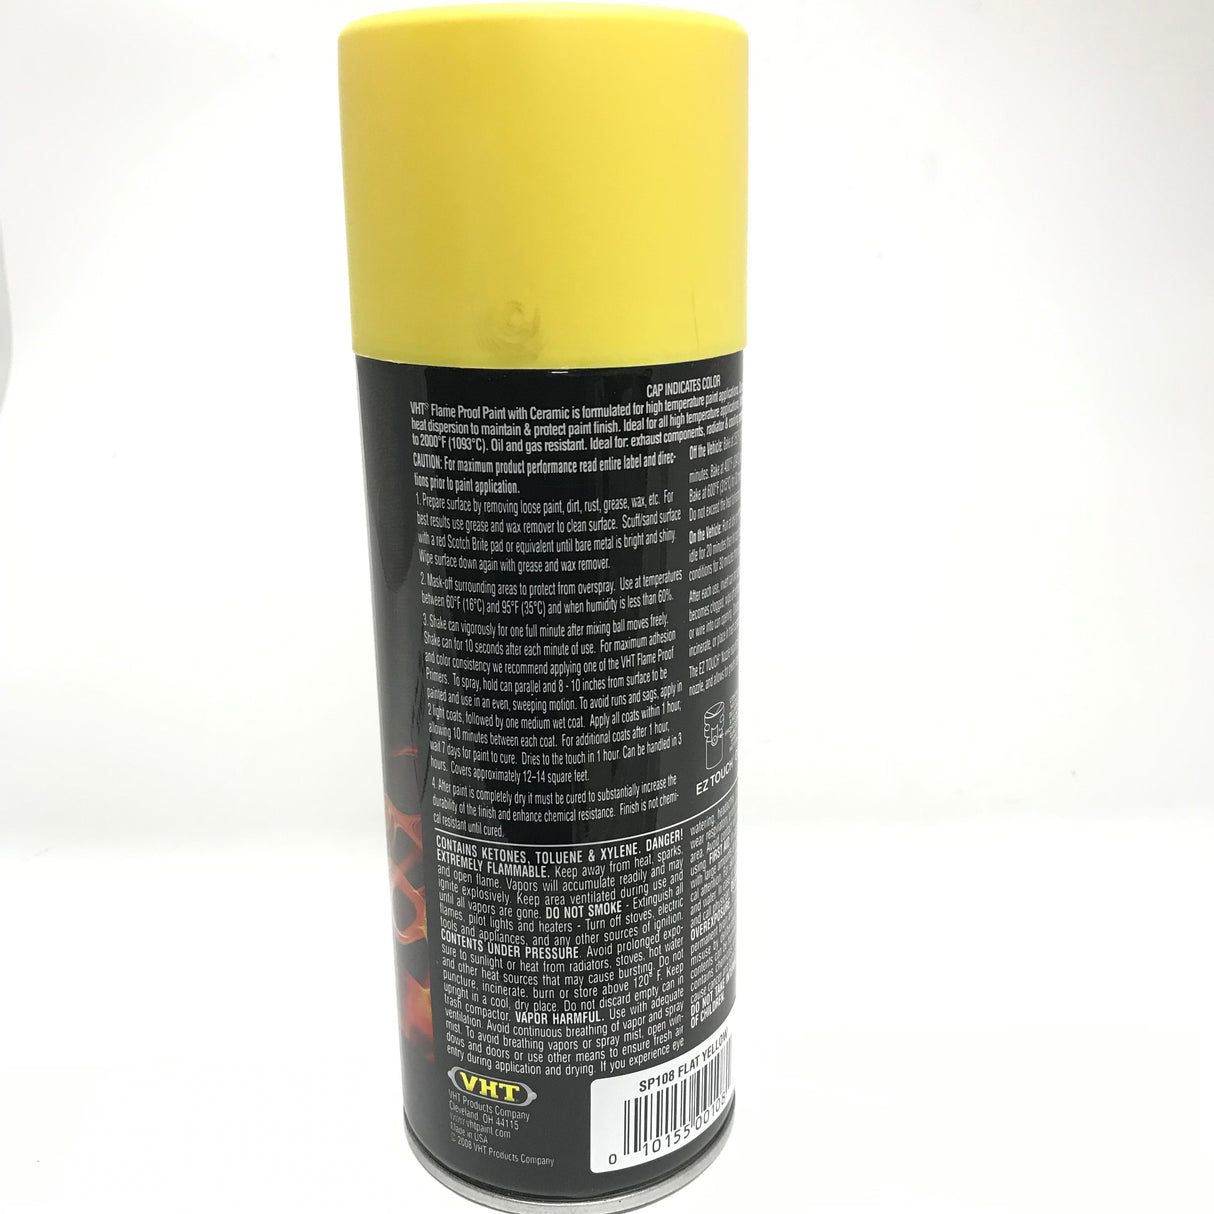 VHT SP108-4 PACK High Temperature Flame Proof FLAT YELLOW Header Spray Paint - 11oz